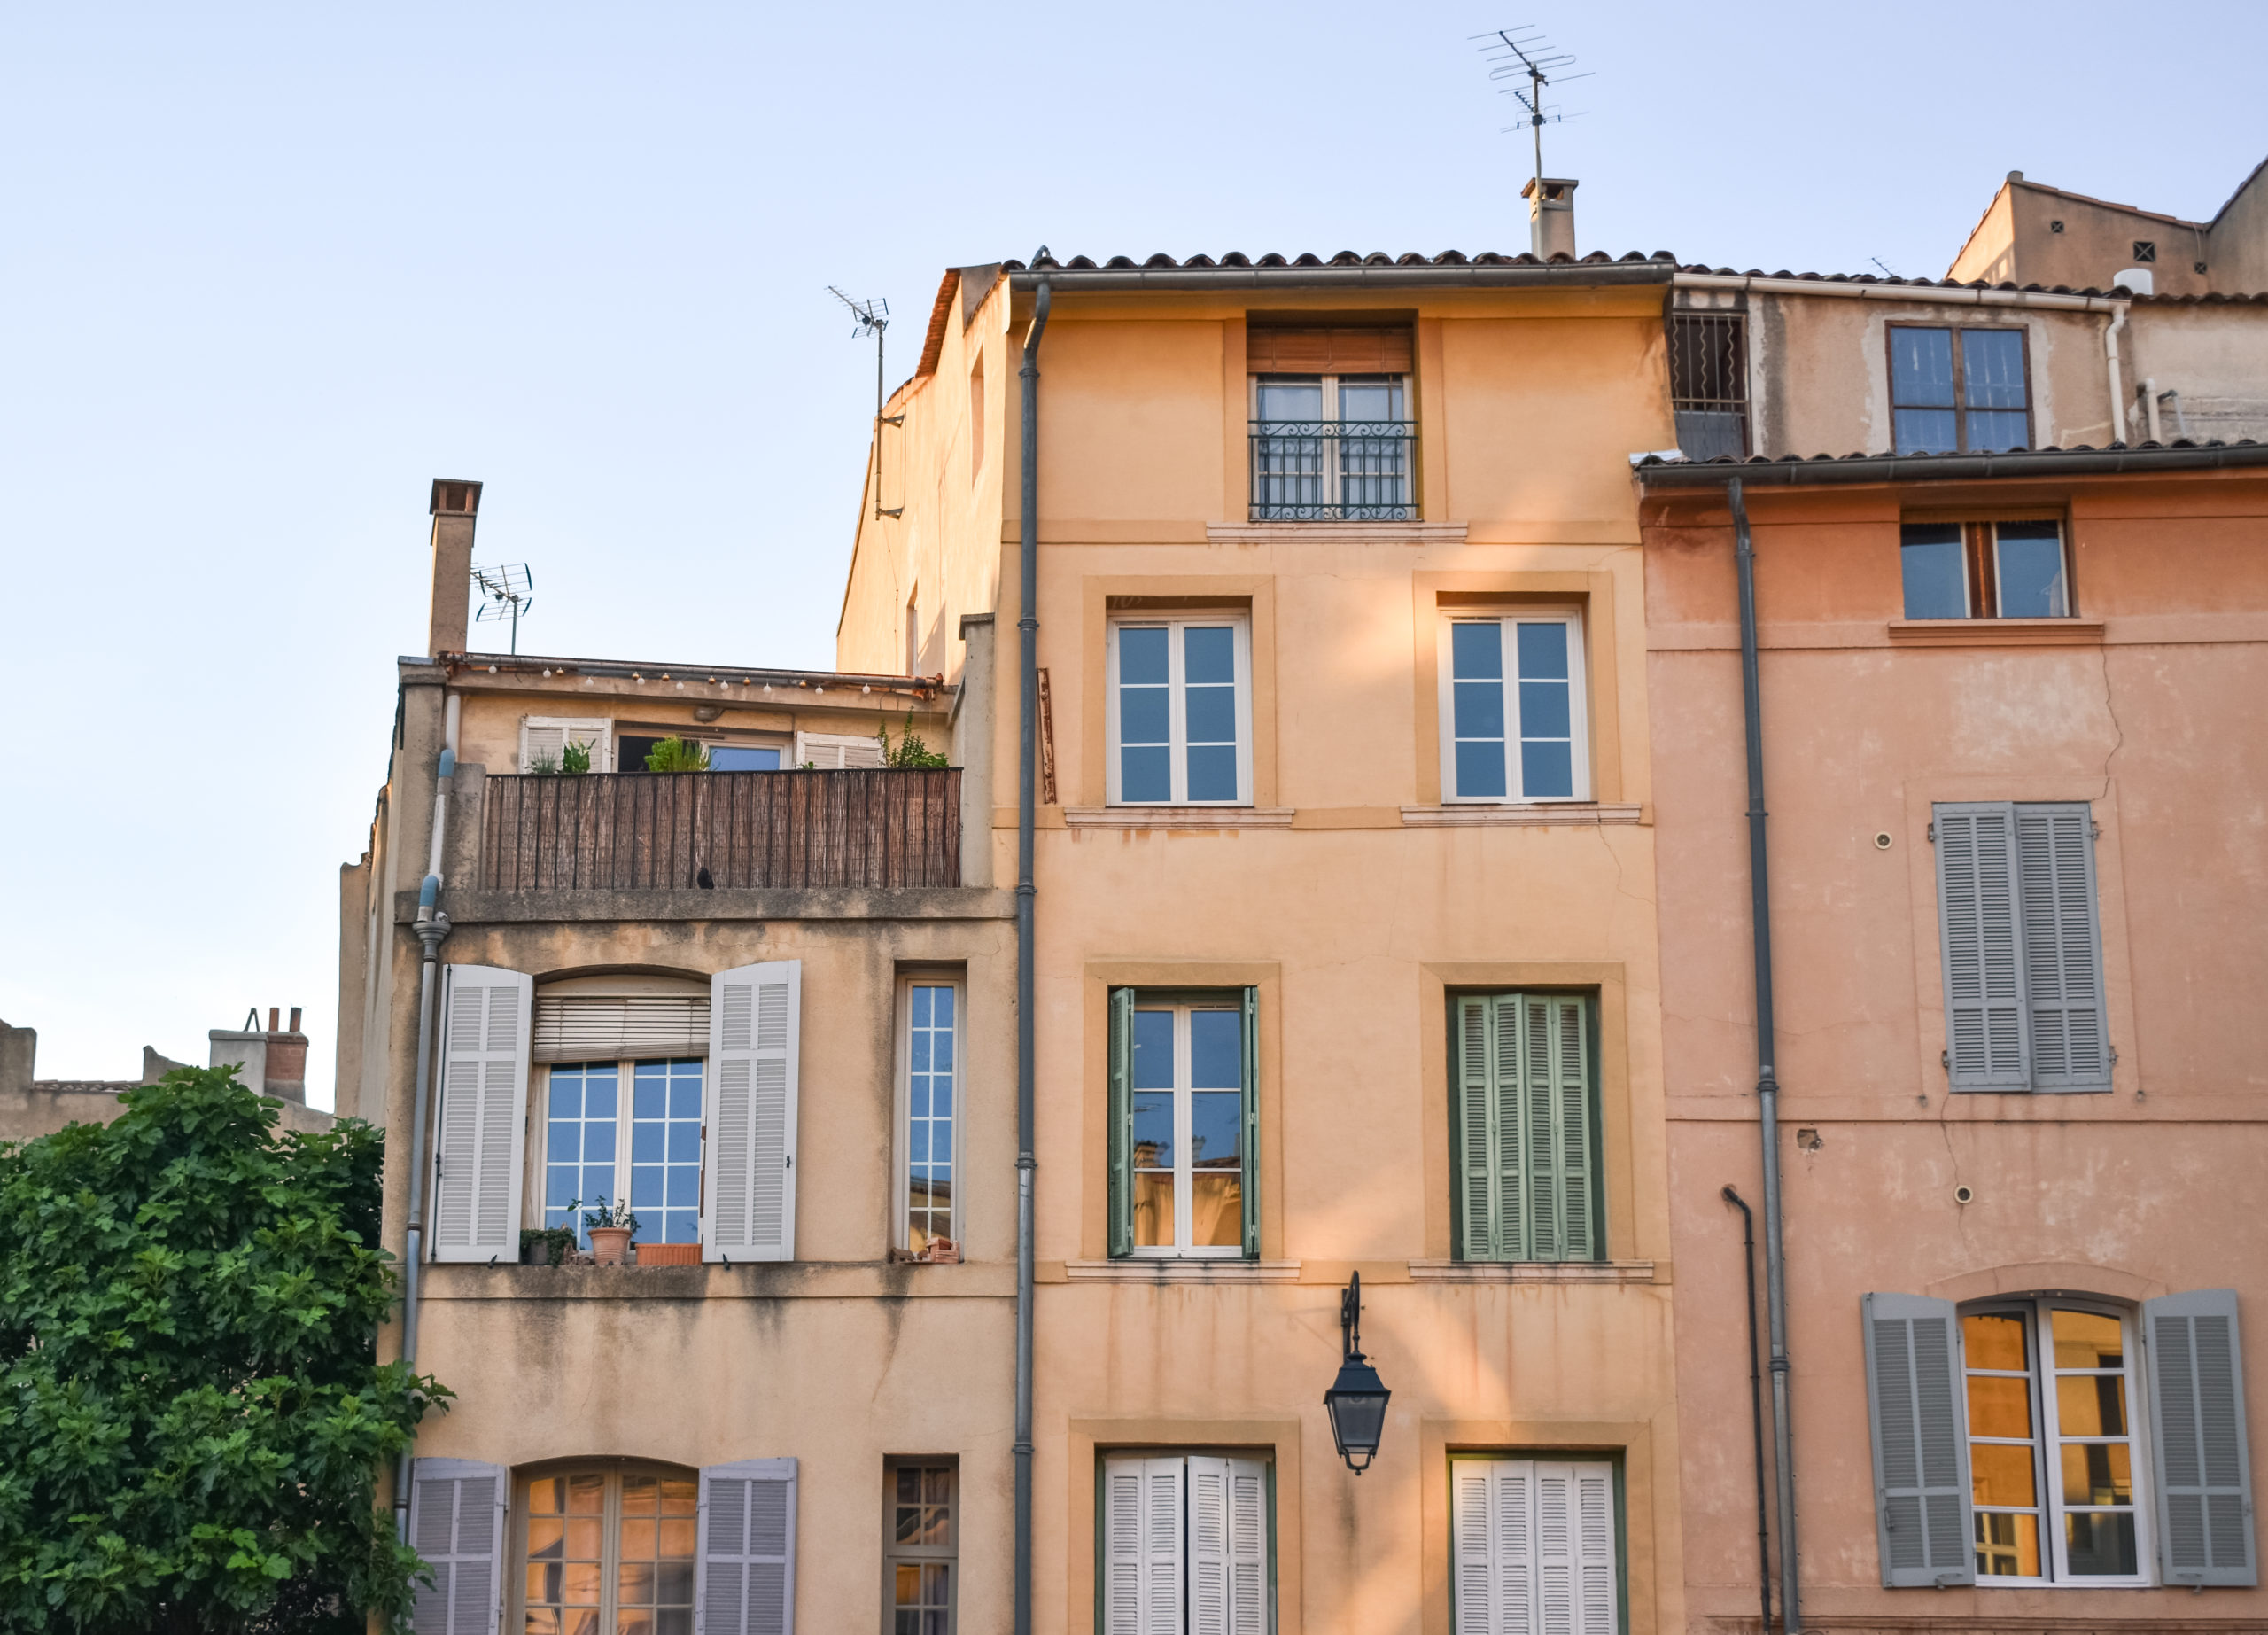 Travel Guide to Aix en Provence